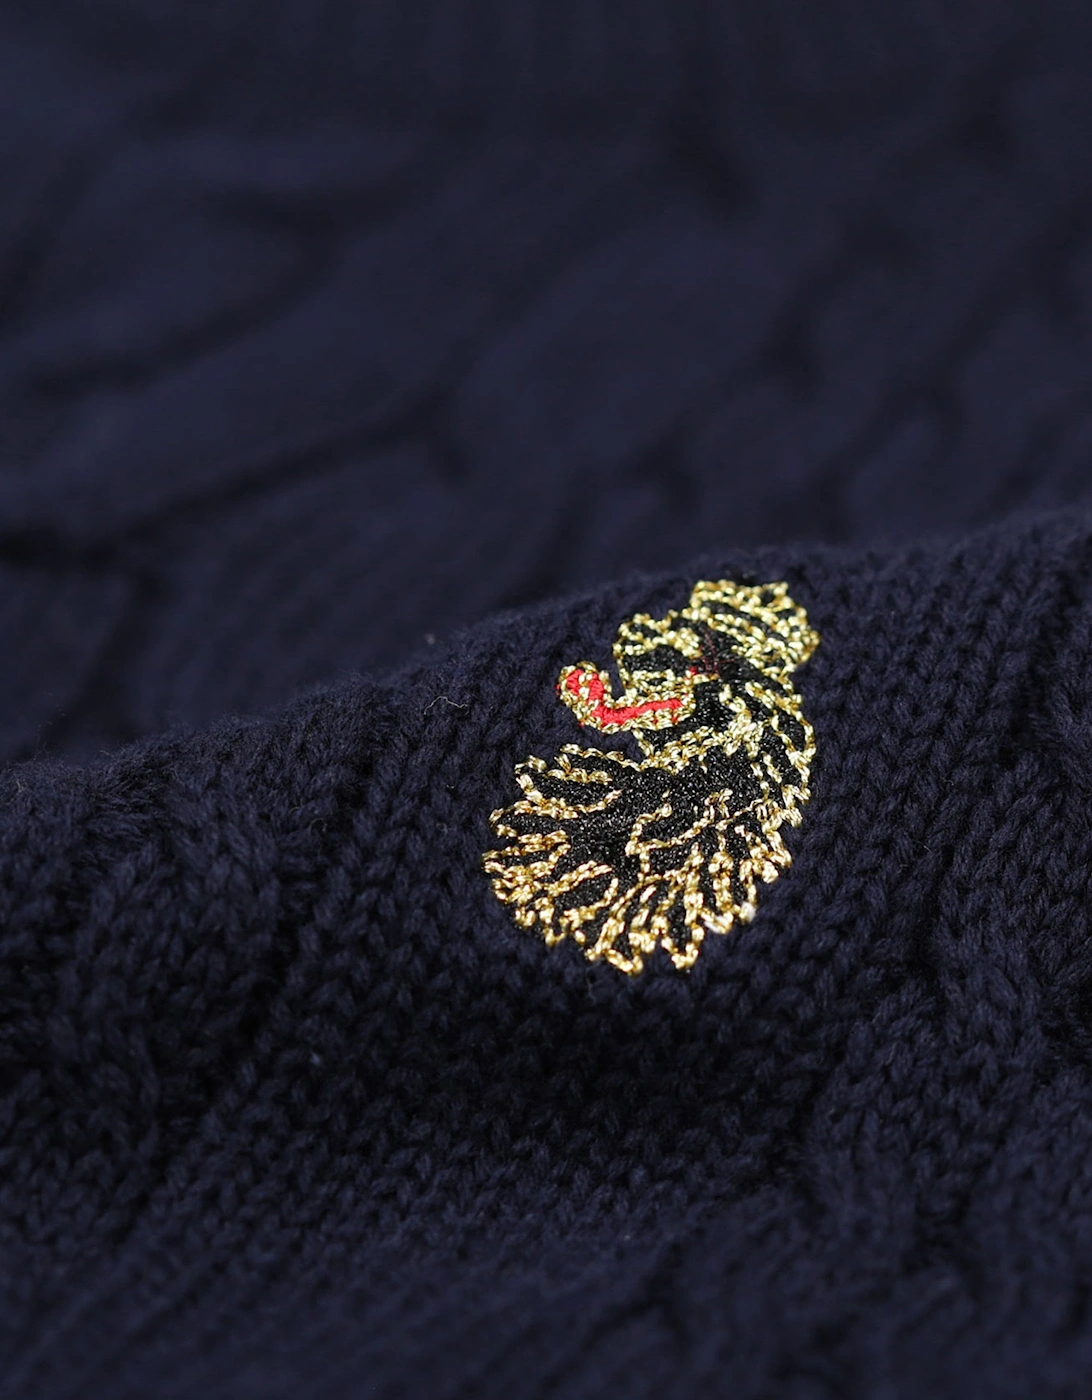 Carter Johnson Cable Knit Crew Neck Sweater | Very Dark Navy